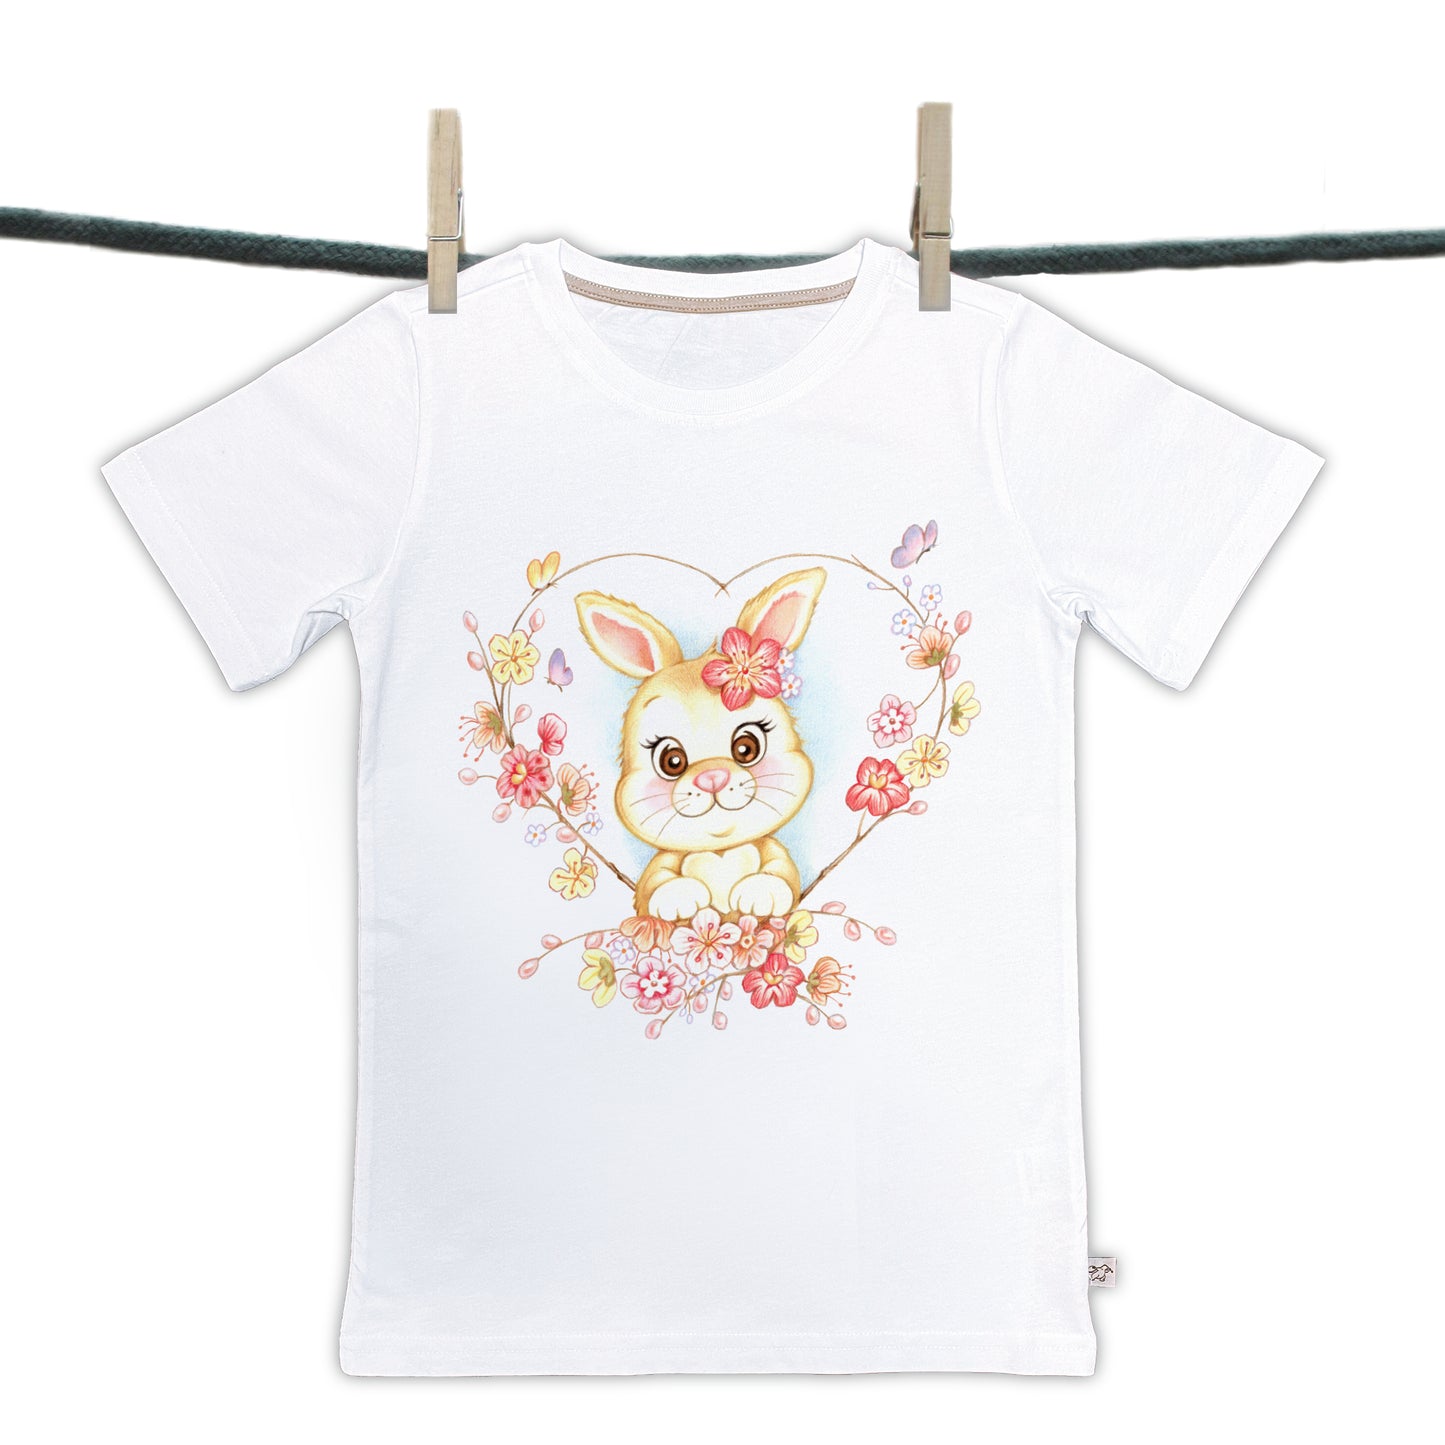 T-shirts - Sweet Dreams Collection - Bunny